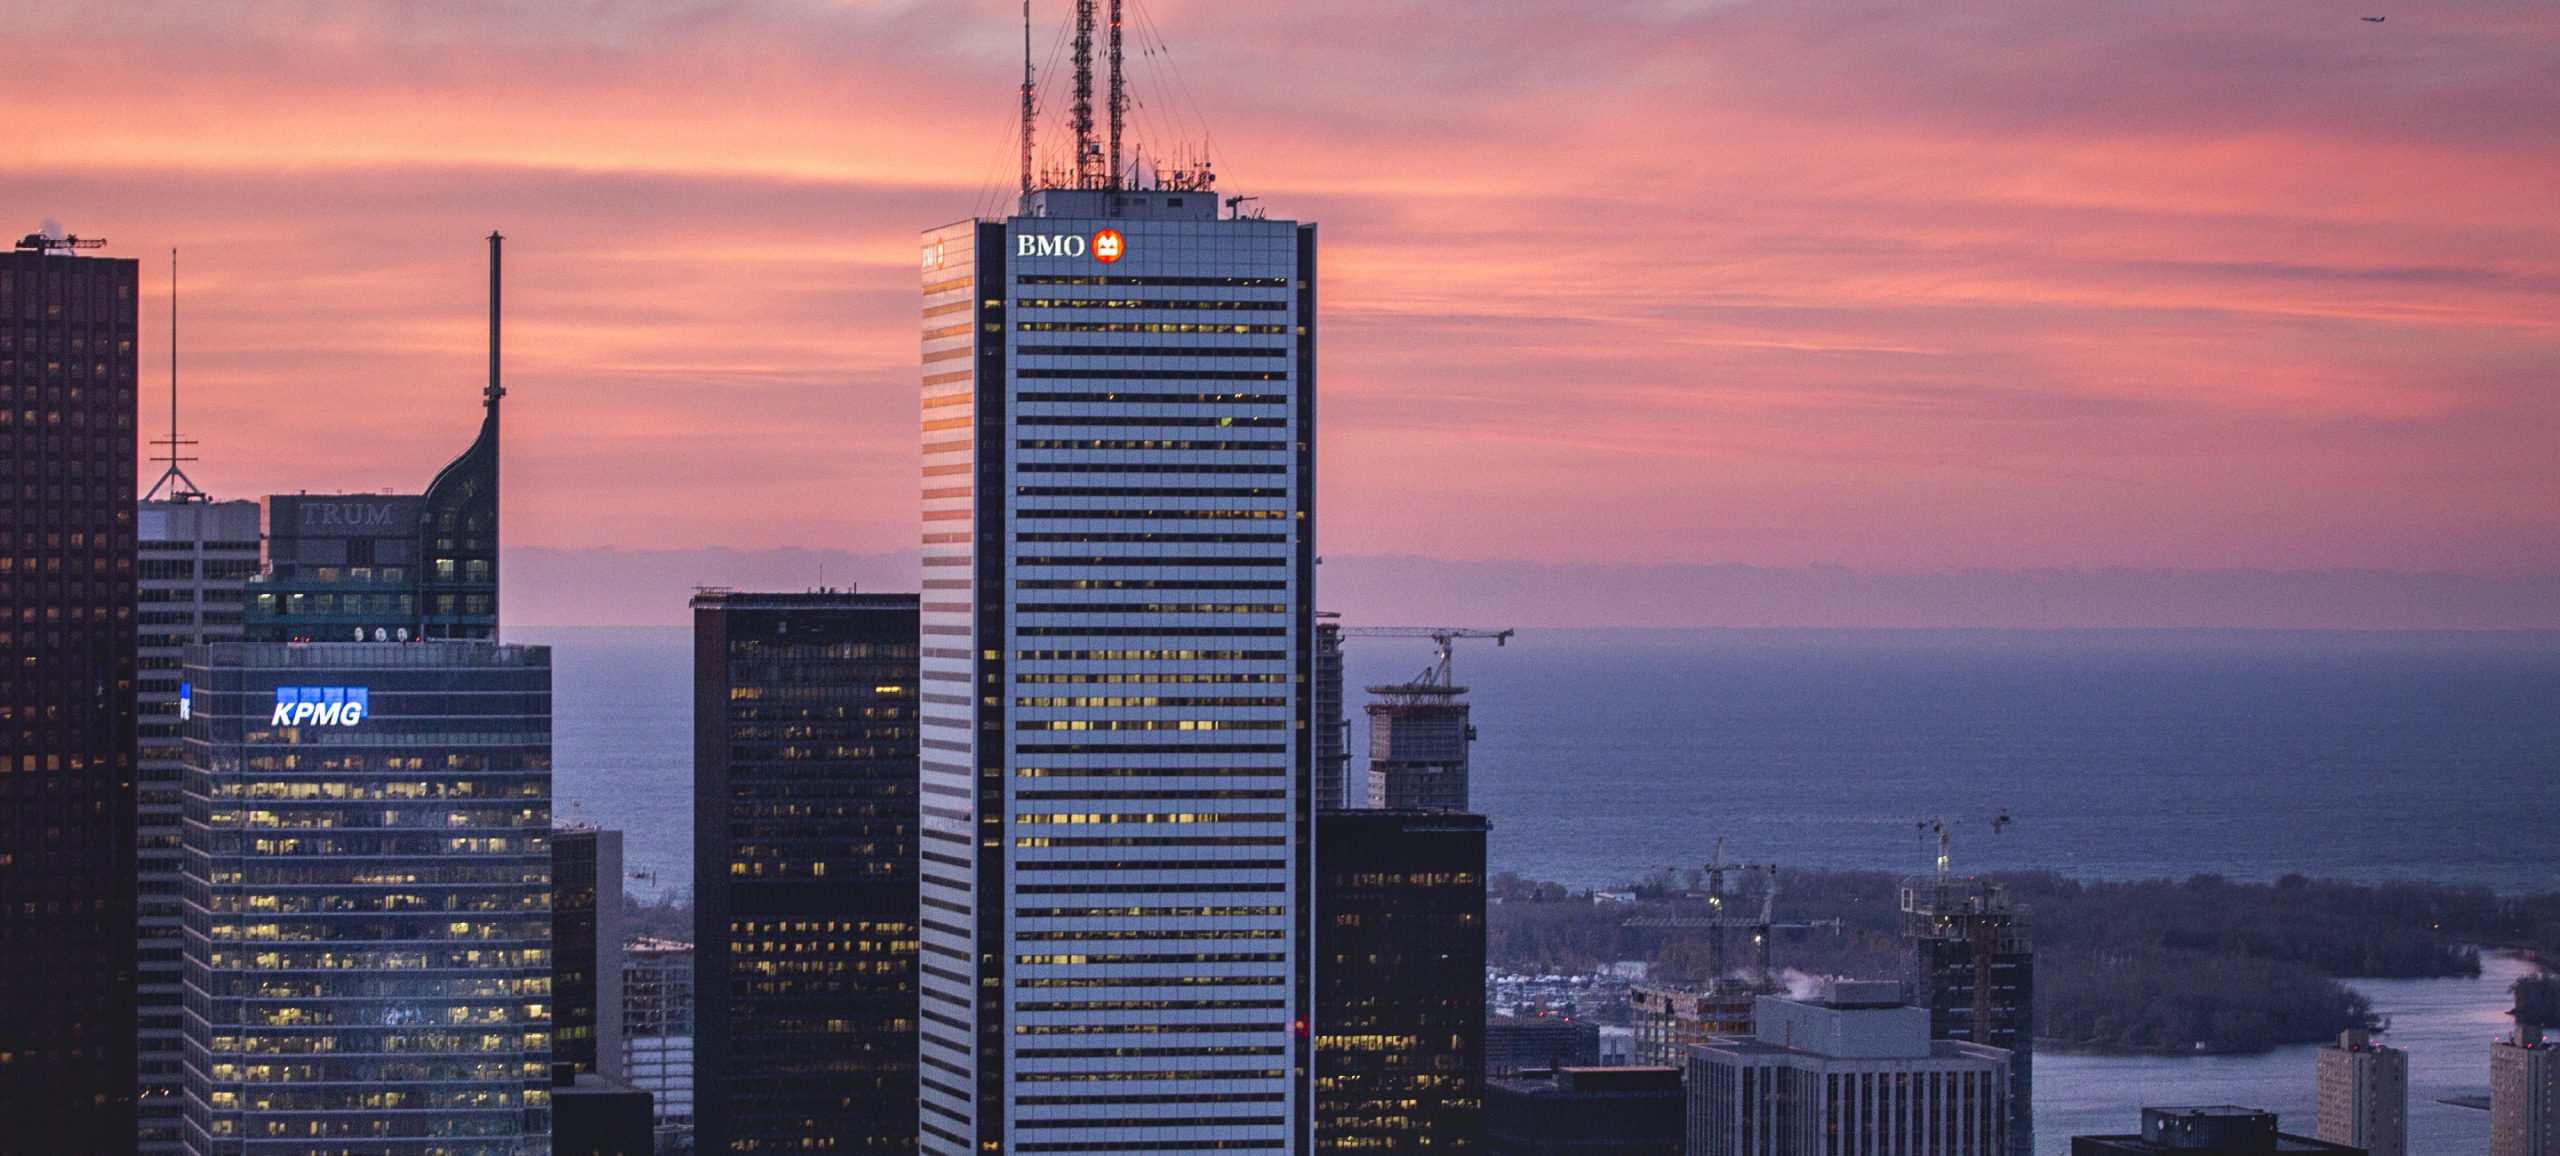 The Toronto skyline at sunset featuring the BMO logo sign designed by Ove atop First Canadian Place.